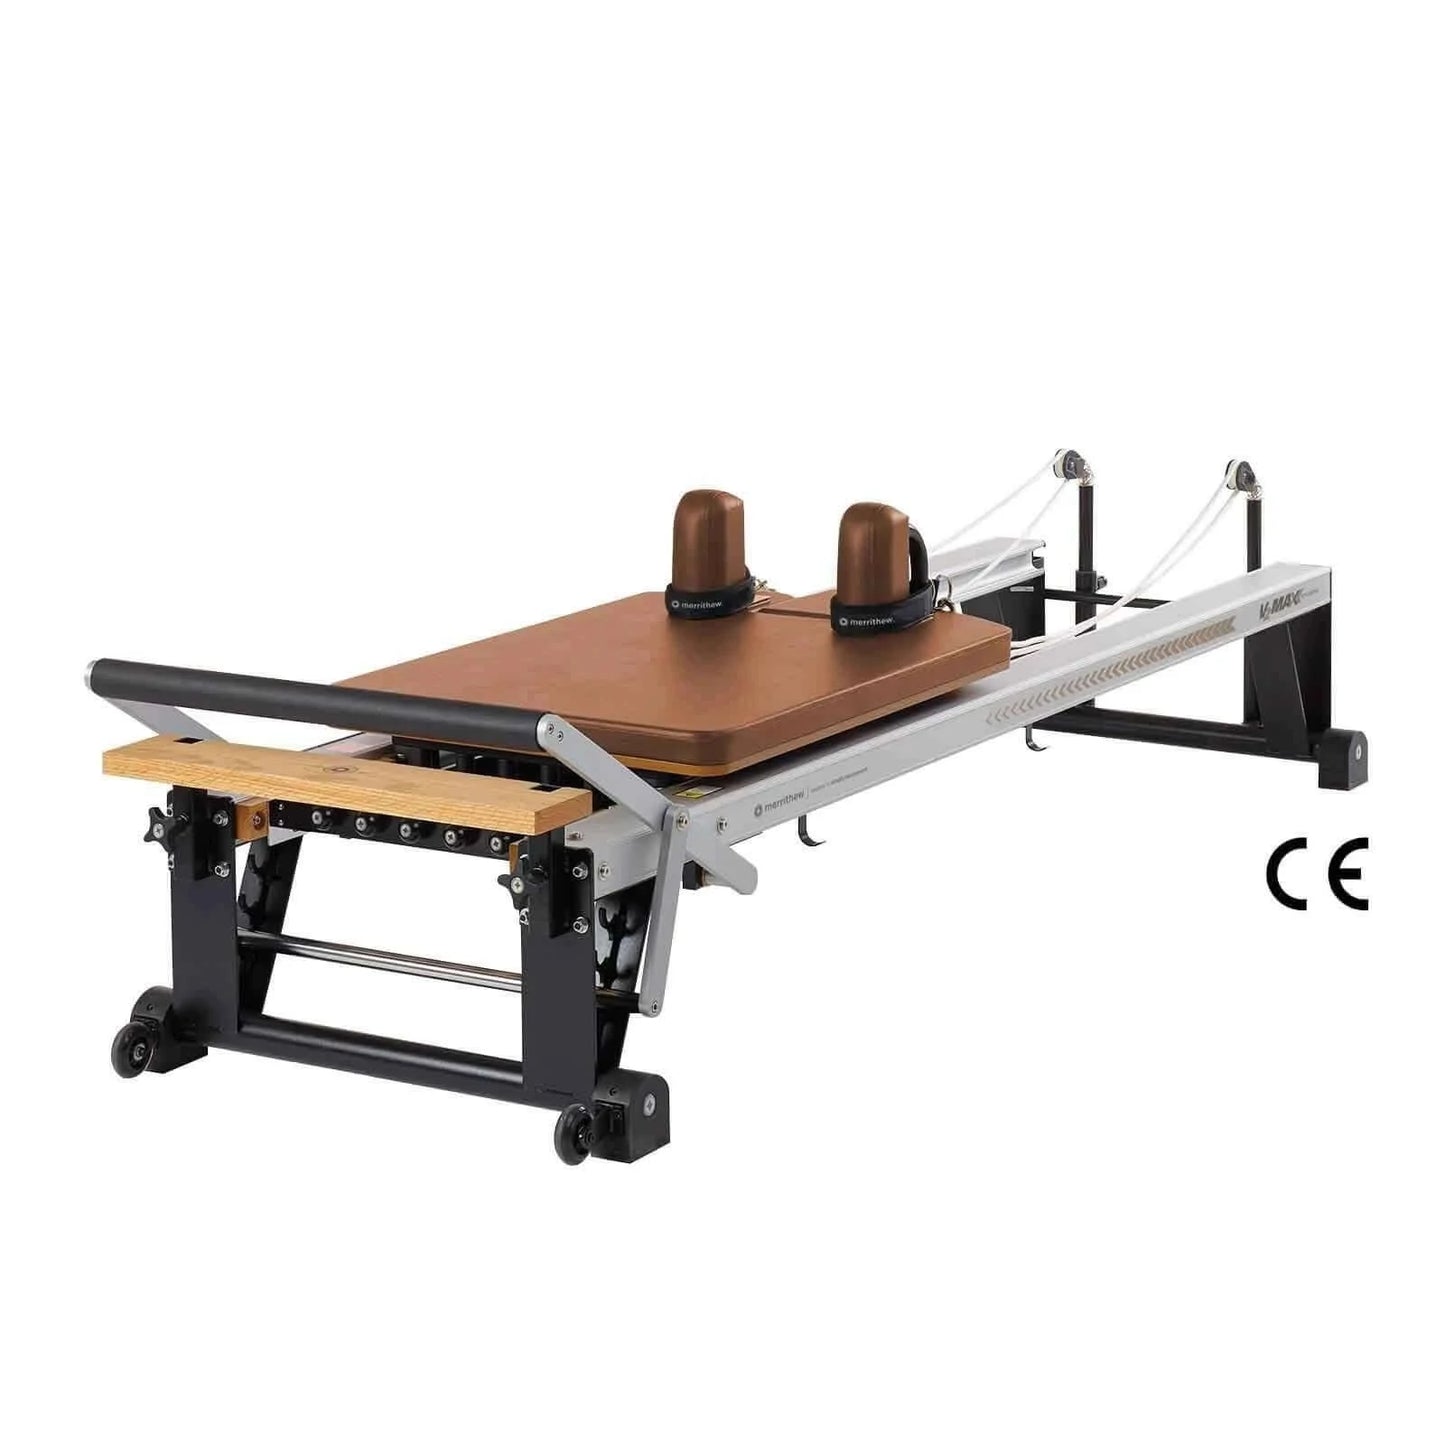 Sierra Brick Merrithew™ Pilates Reformer Extension Upgrade · V2 Max™ by Merrithew™ sold by Pilates Matters® by BSP LLC